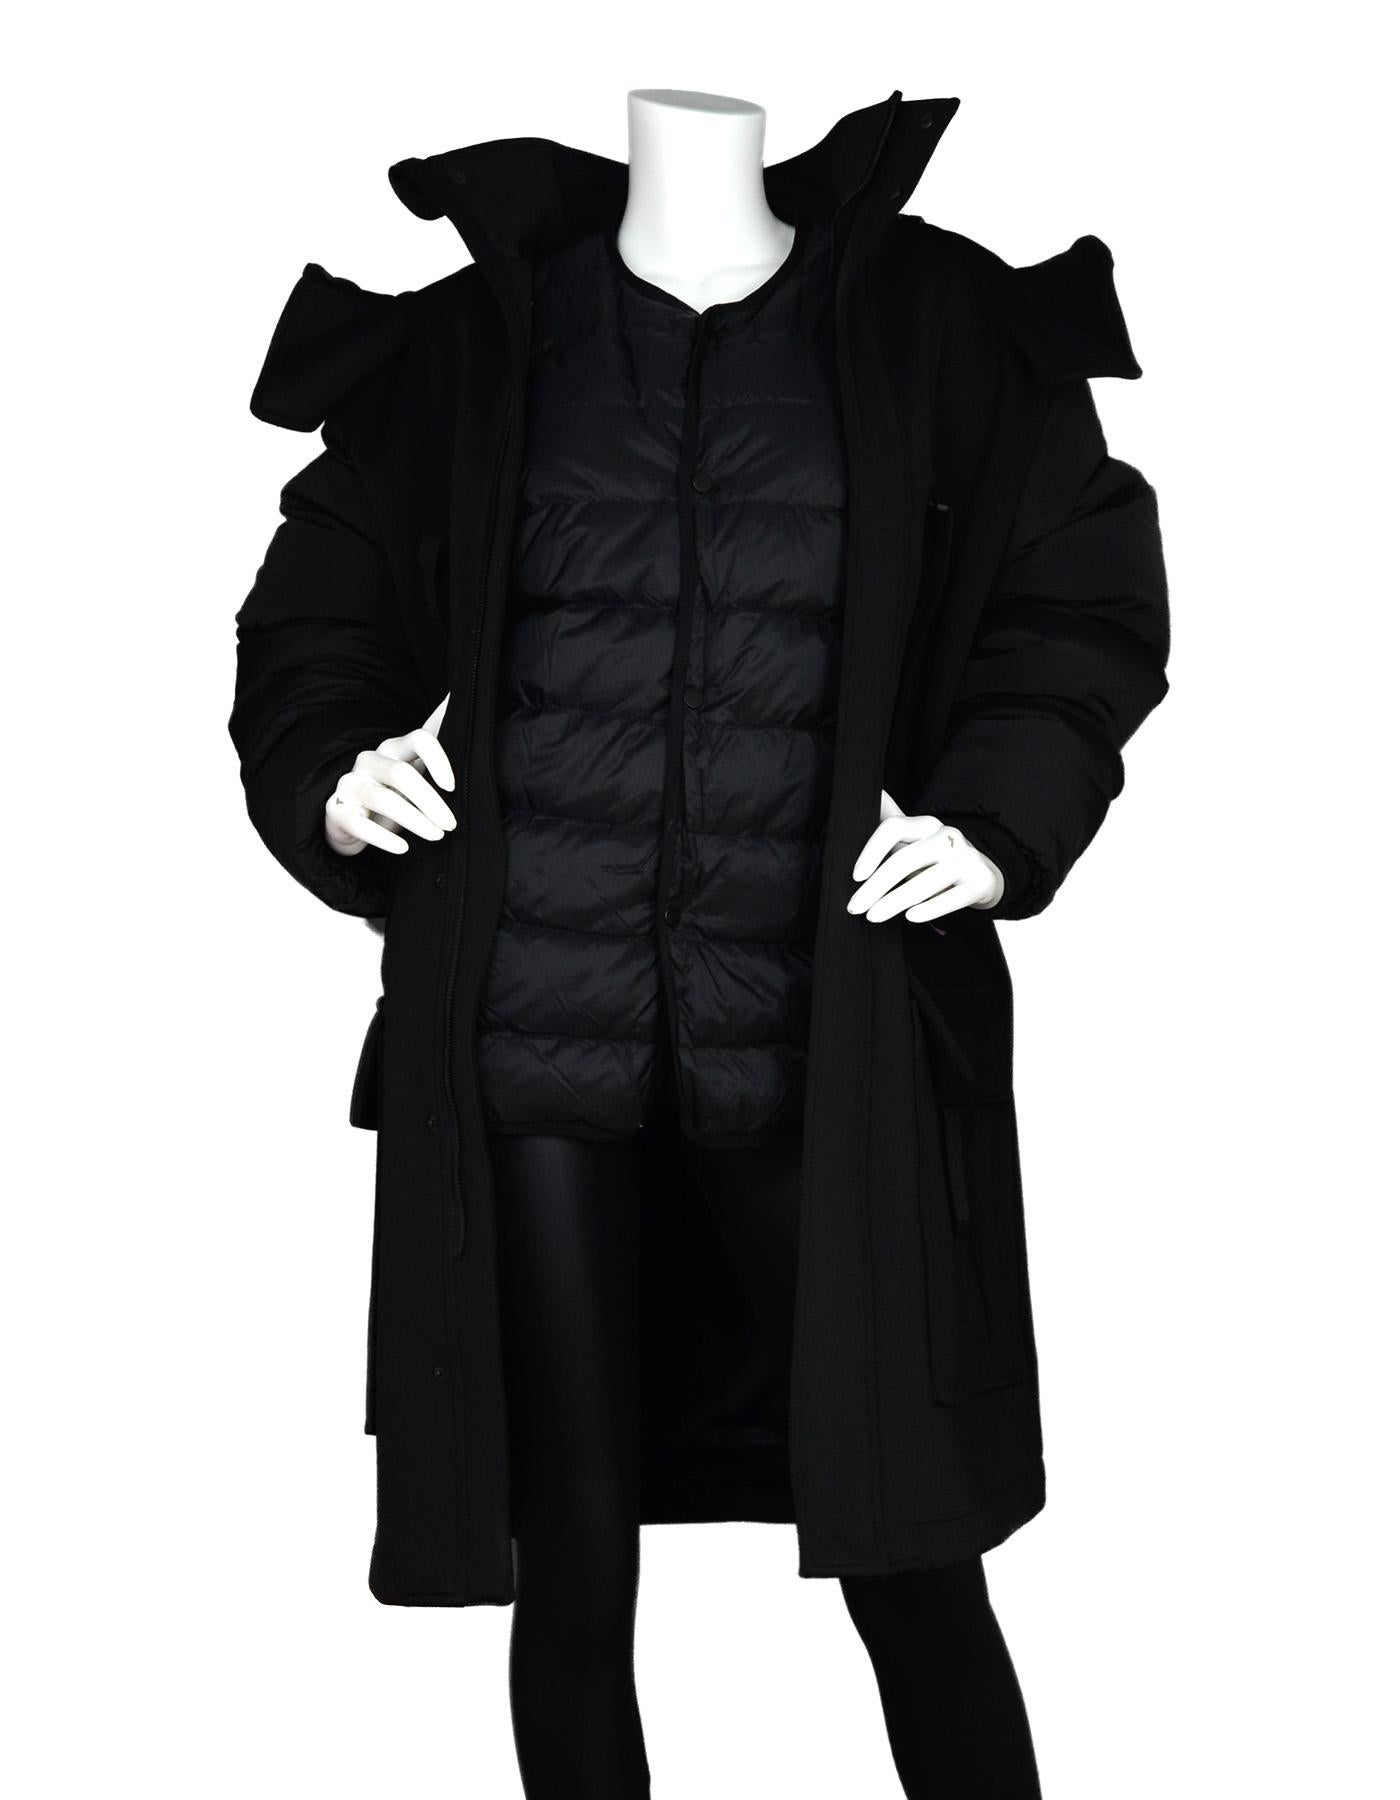 Alexander Wang x H&M Black Puffer Coat W/ Removable Lining Sz M

Made In: China
Year of Production: 2014
Color: Black
Materials: Shell- 90% polyester, 10% elastane. Back: 90% wool, 10% polyester. Padding: 90% down, 10% feather
Lining: 100%